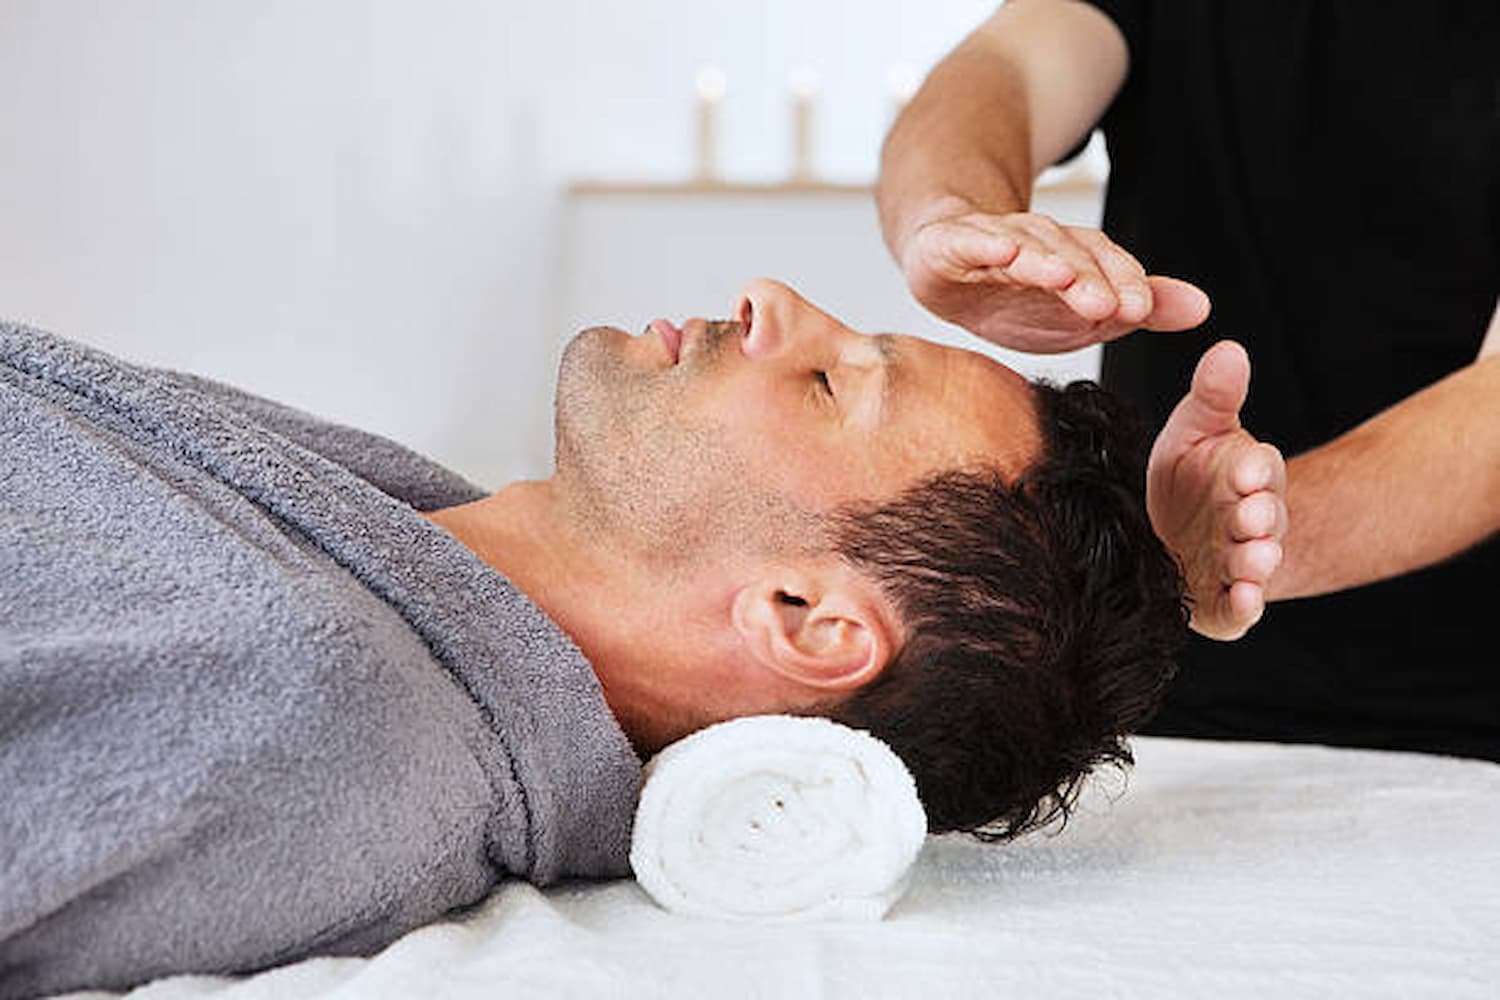 5 Ways to Advertise Your Reiki Services to Attract Clients